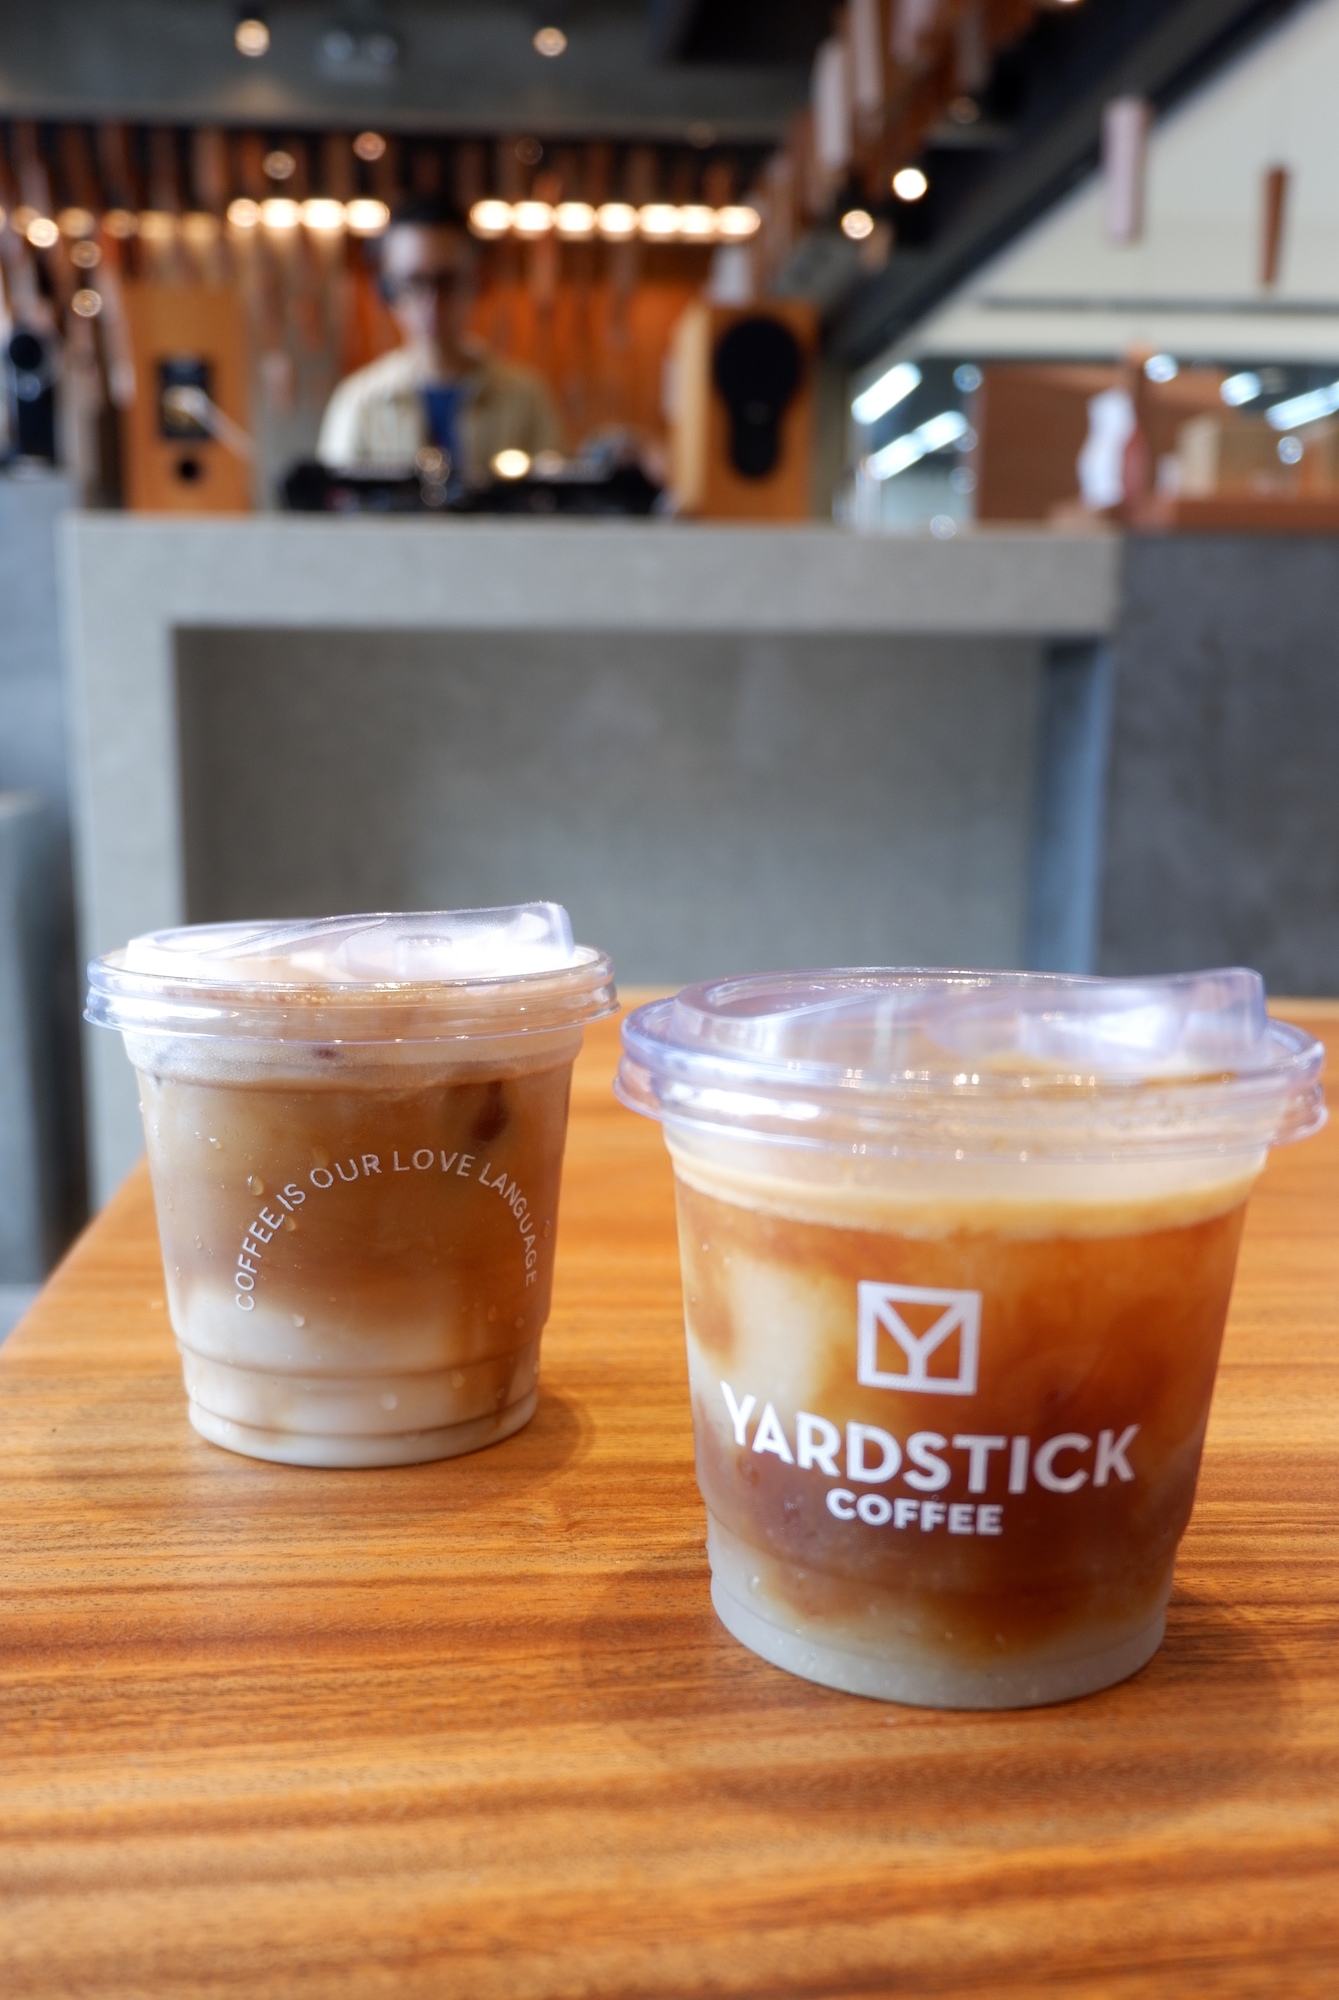 Yardstick's Sea Salt Latte and Manila Latte are exclusive to the MOA Square branch